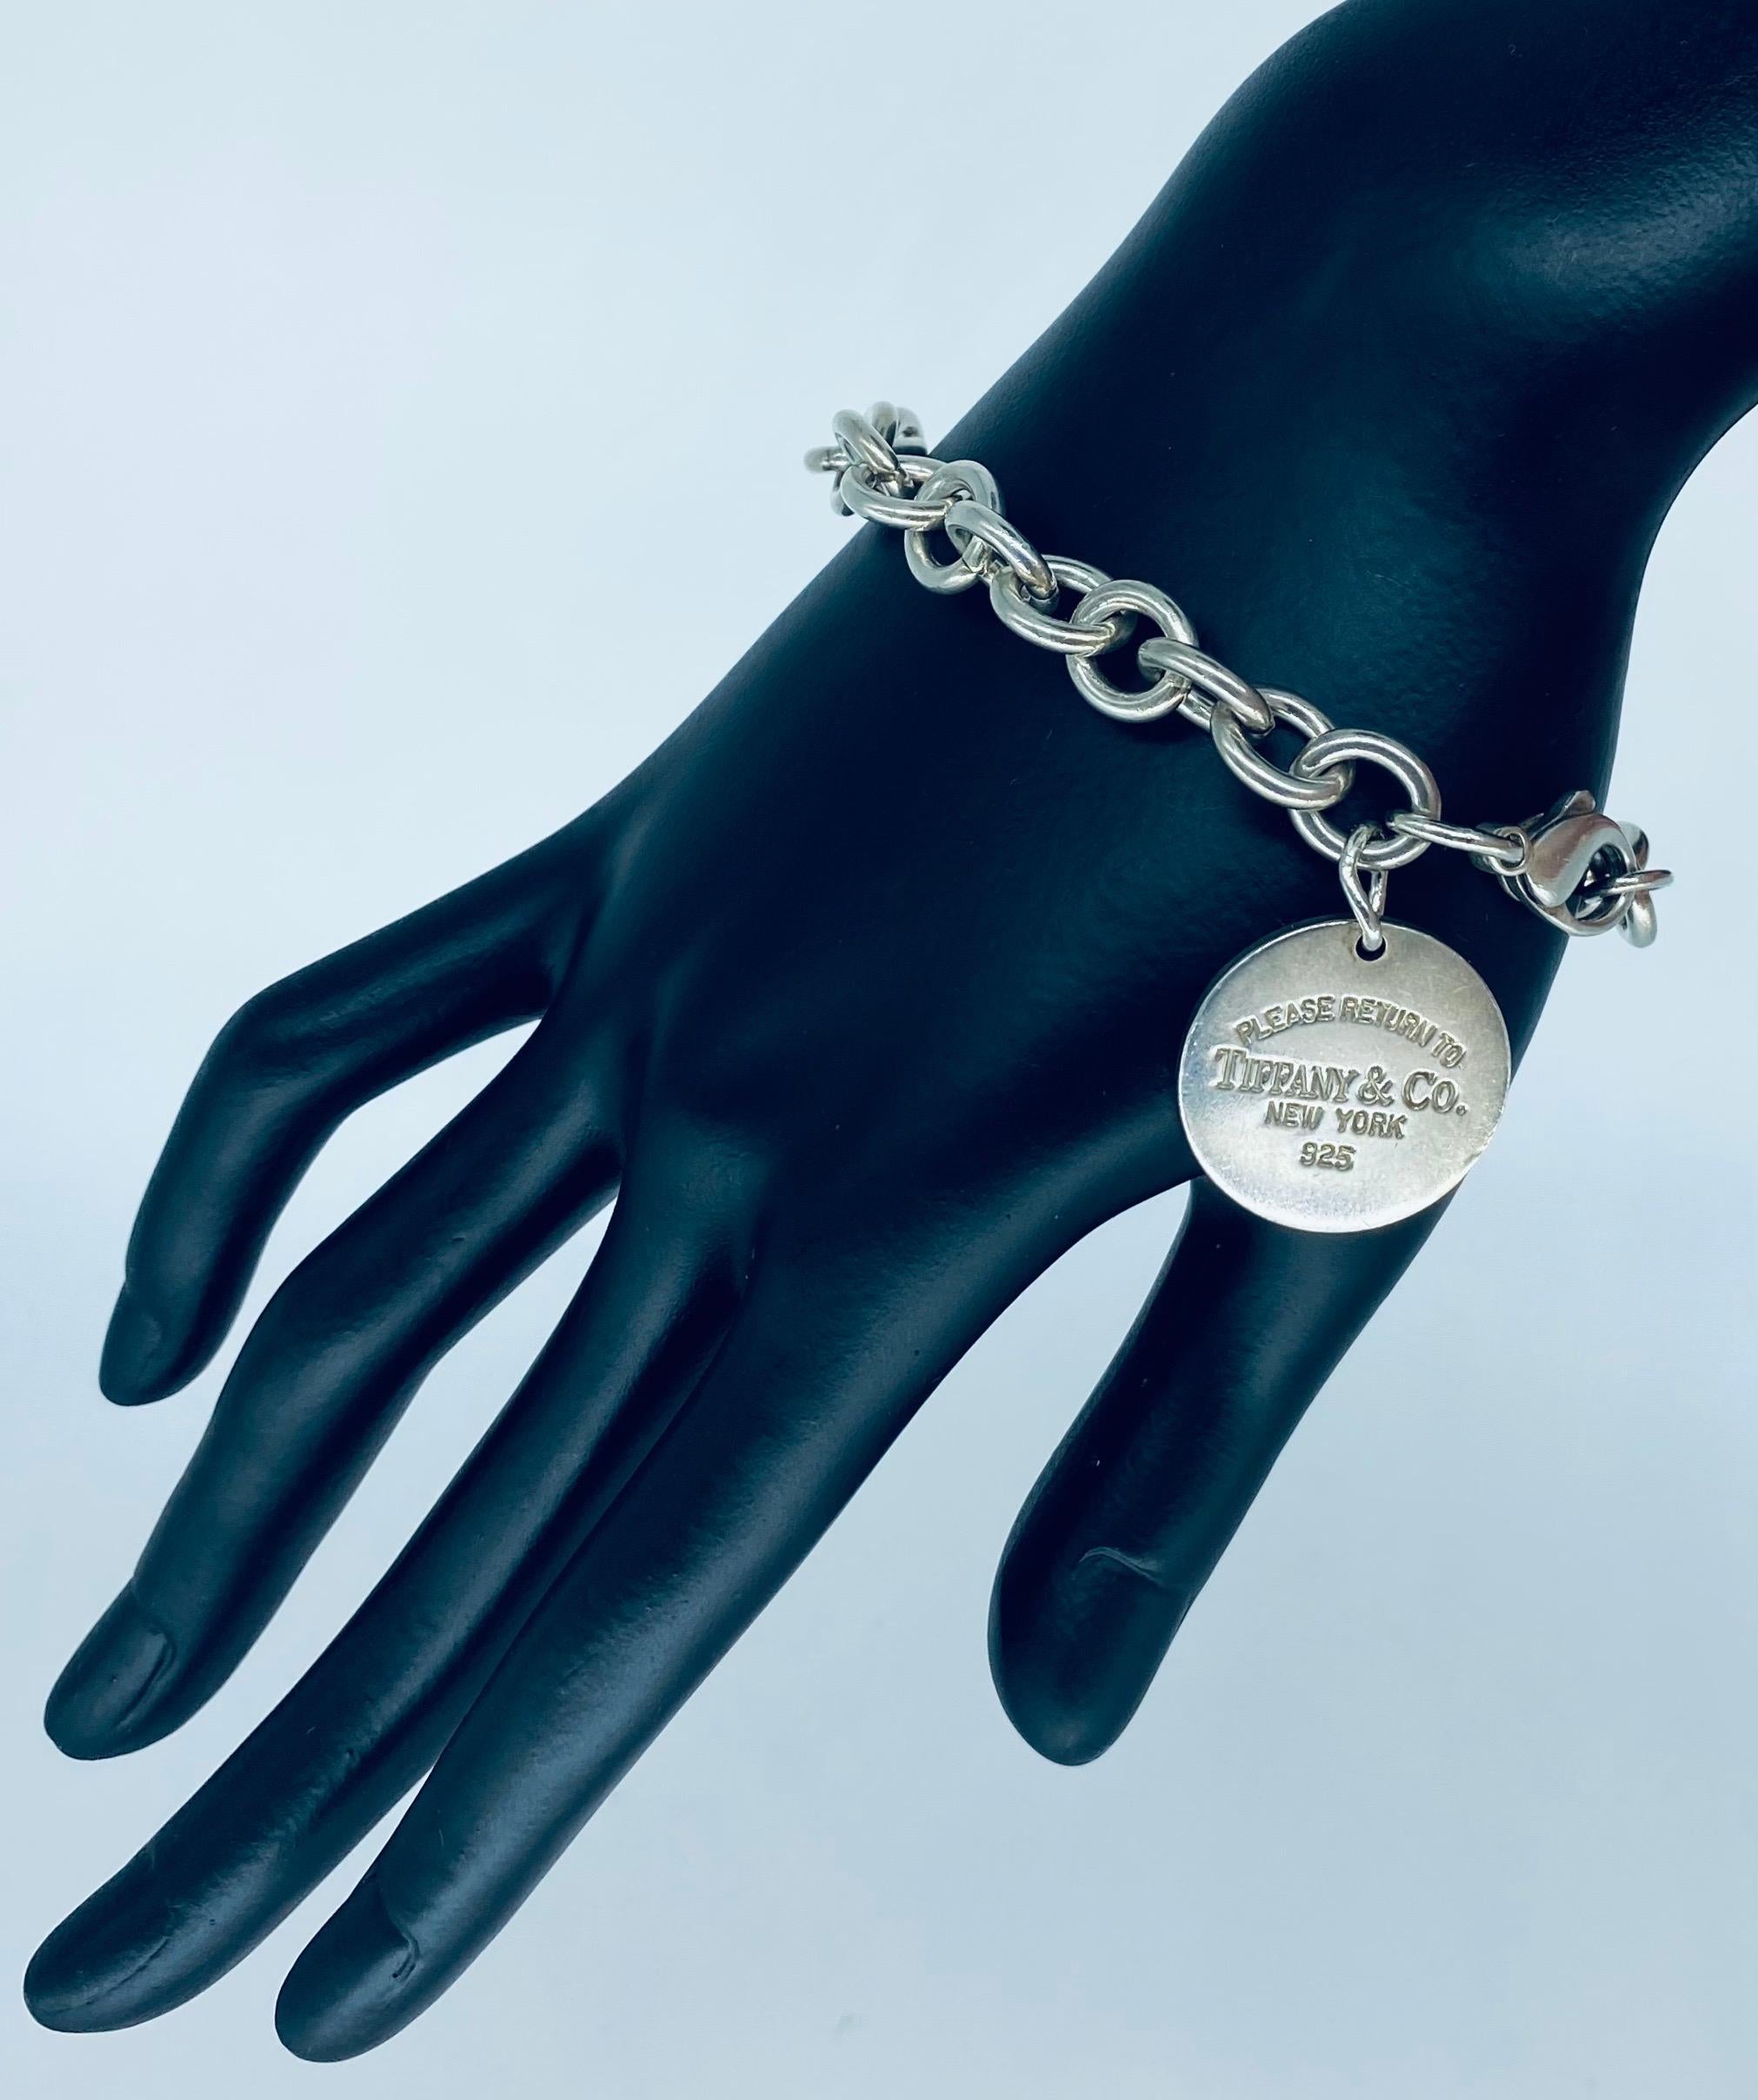 Please Return To Tiffany & Co. New York 925 Sterling Silver Bracelet. Classic Tiffany & Co iconic tag bracelet. The bracelet is 8 inches long. 100% authentic Tiffany & co necklace. No original box or papers. The bracelet weights 36.8 grams and